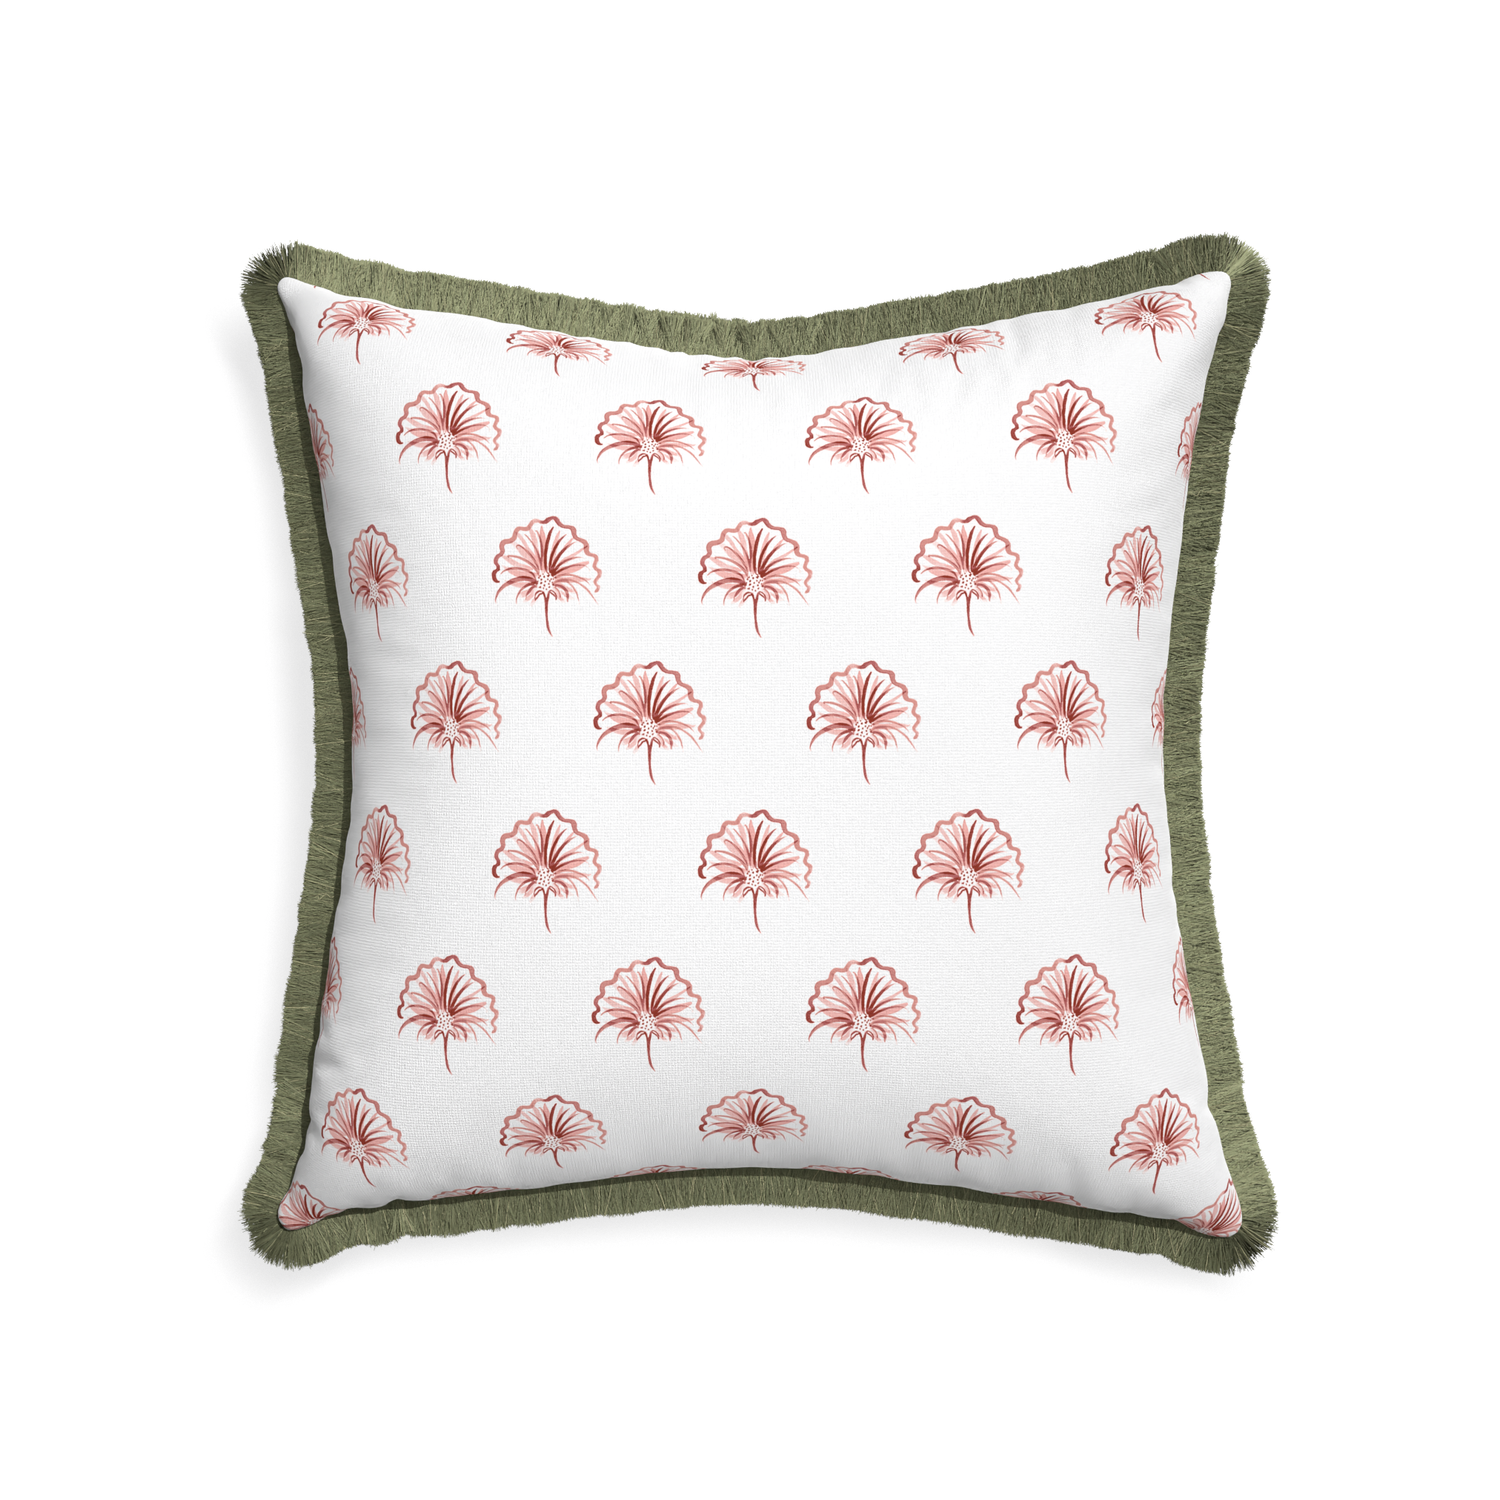 22-square penelope rose custom floral pinkpillow with sage fringe on white background